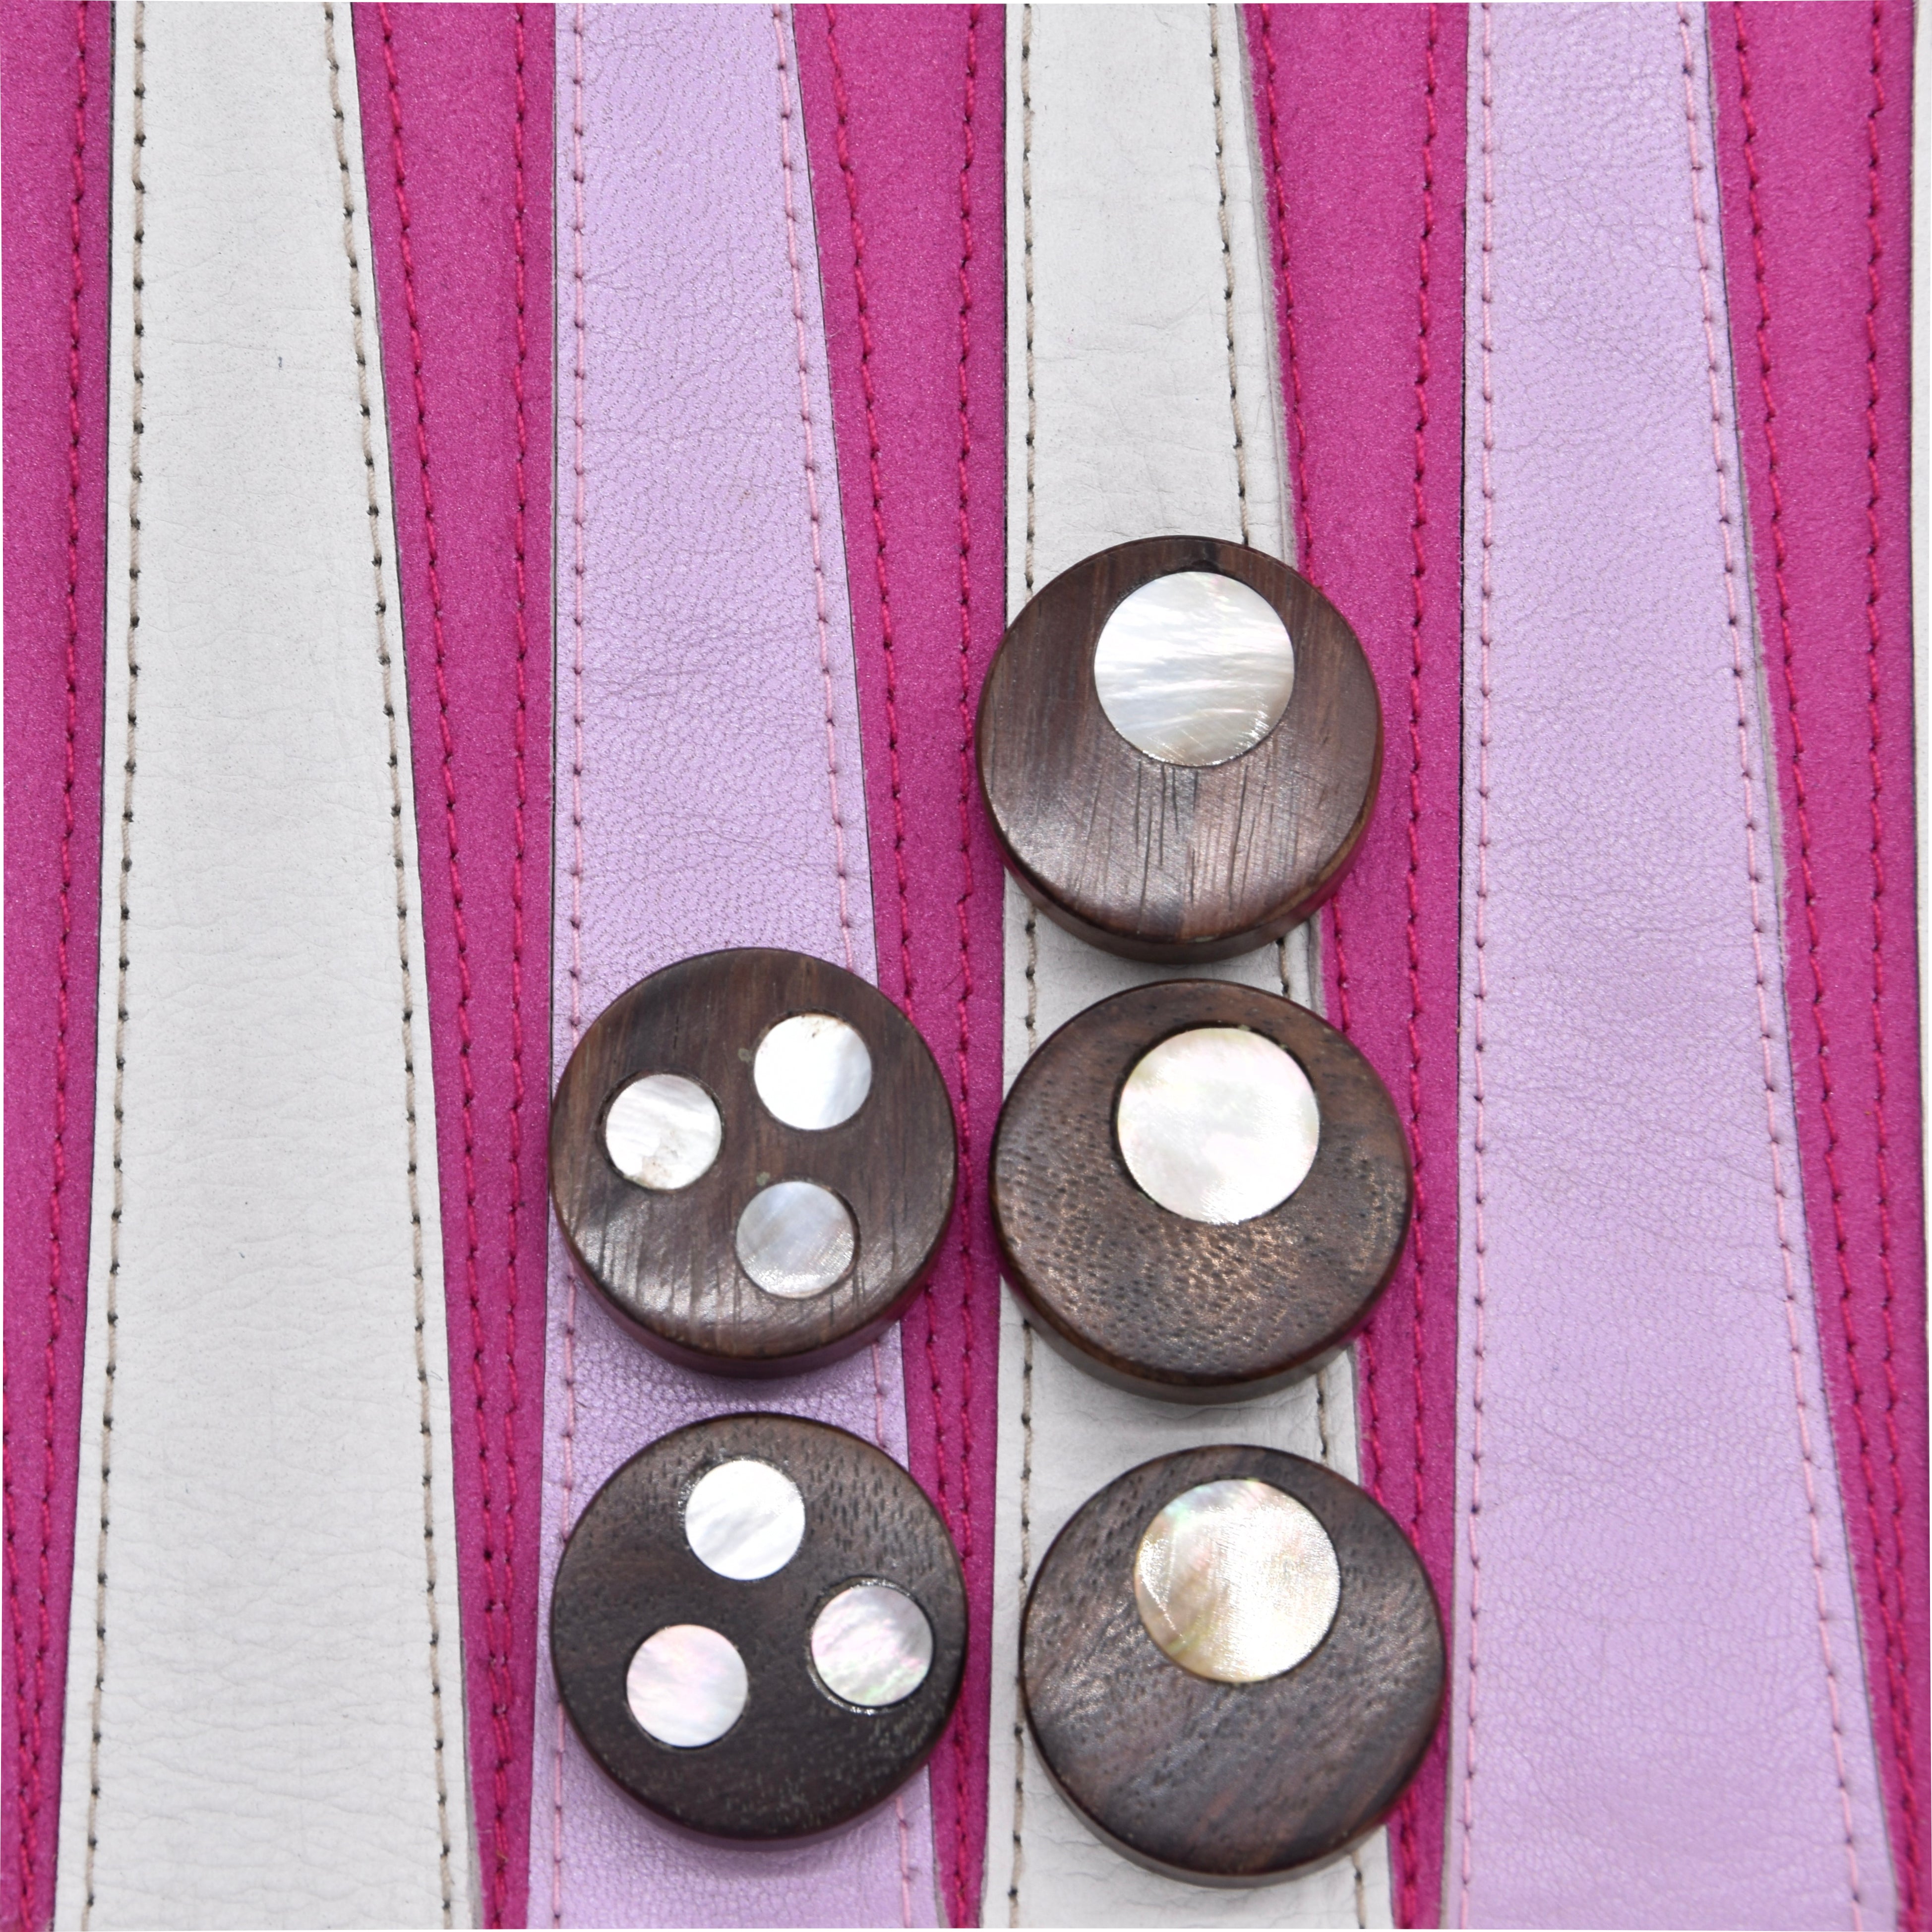 Fuschia backgammon set with wood and mother of pearl inlay checkers